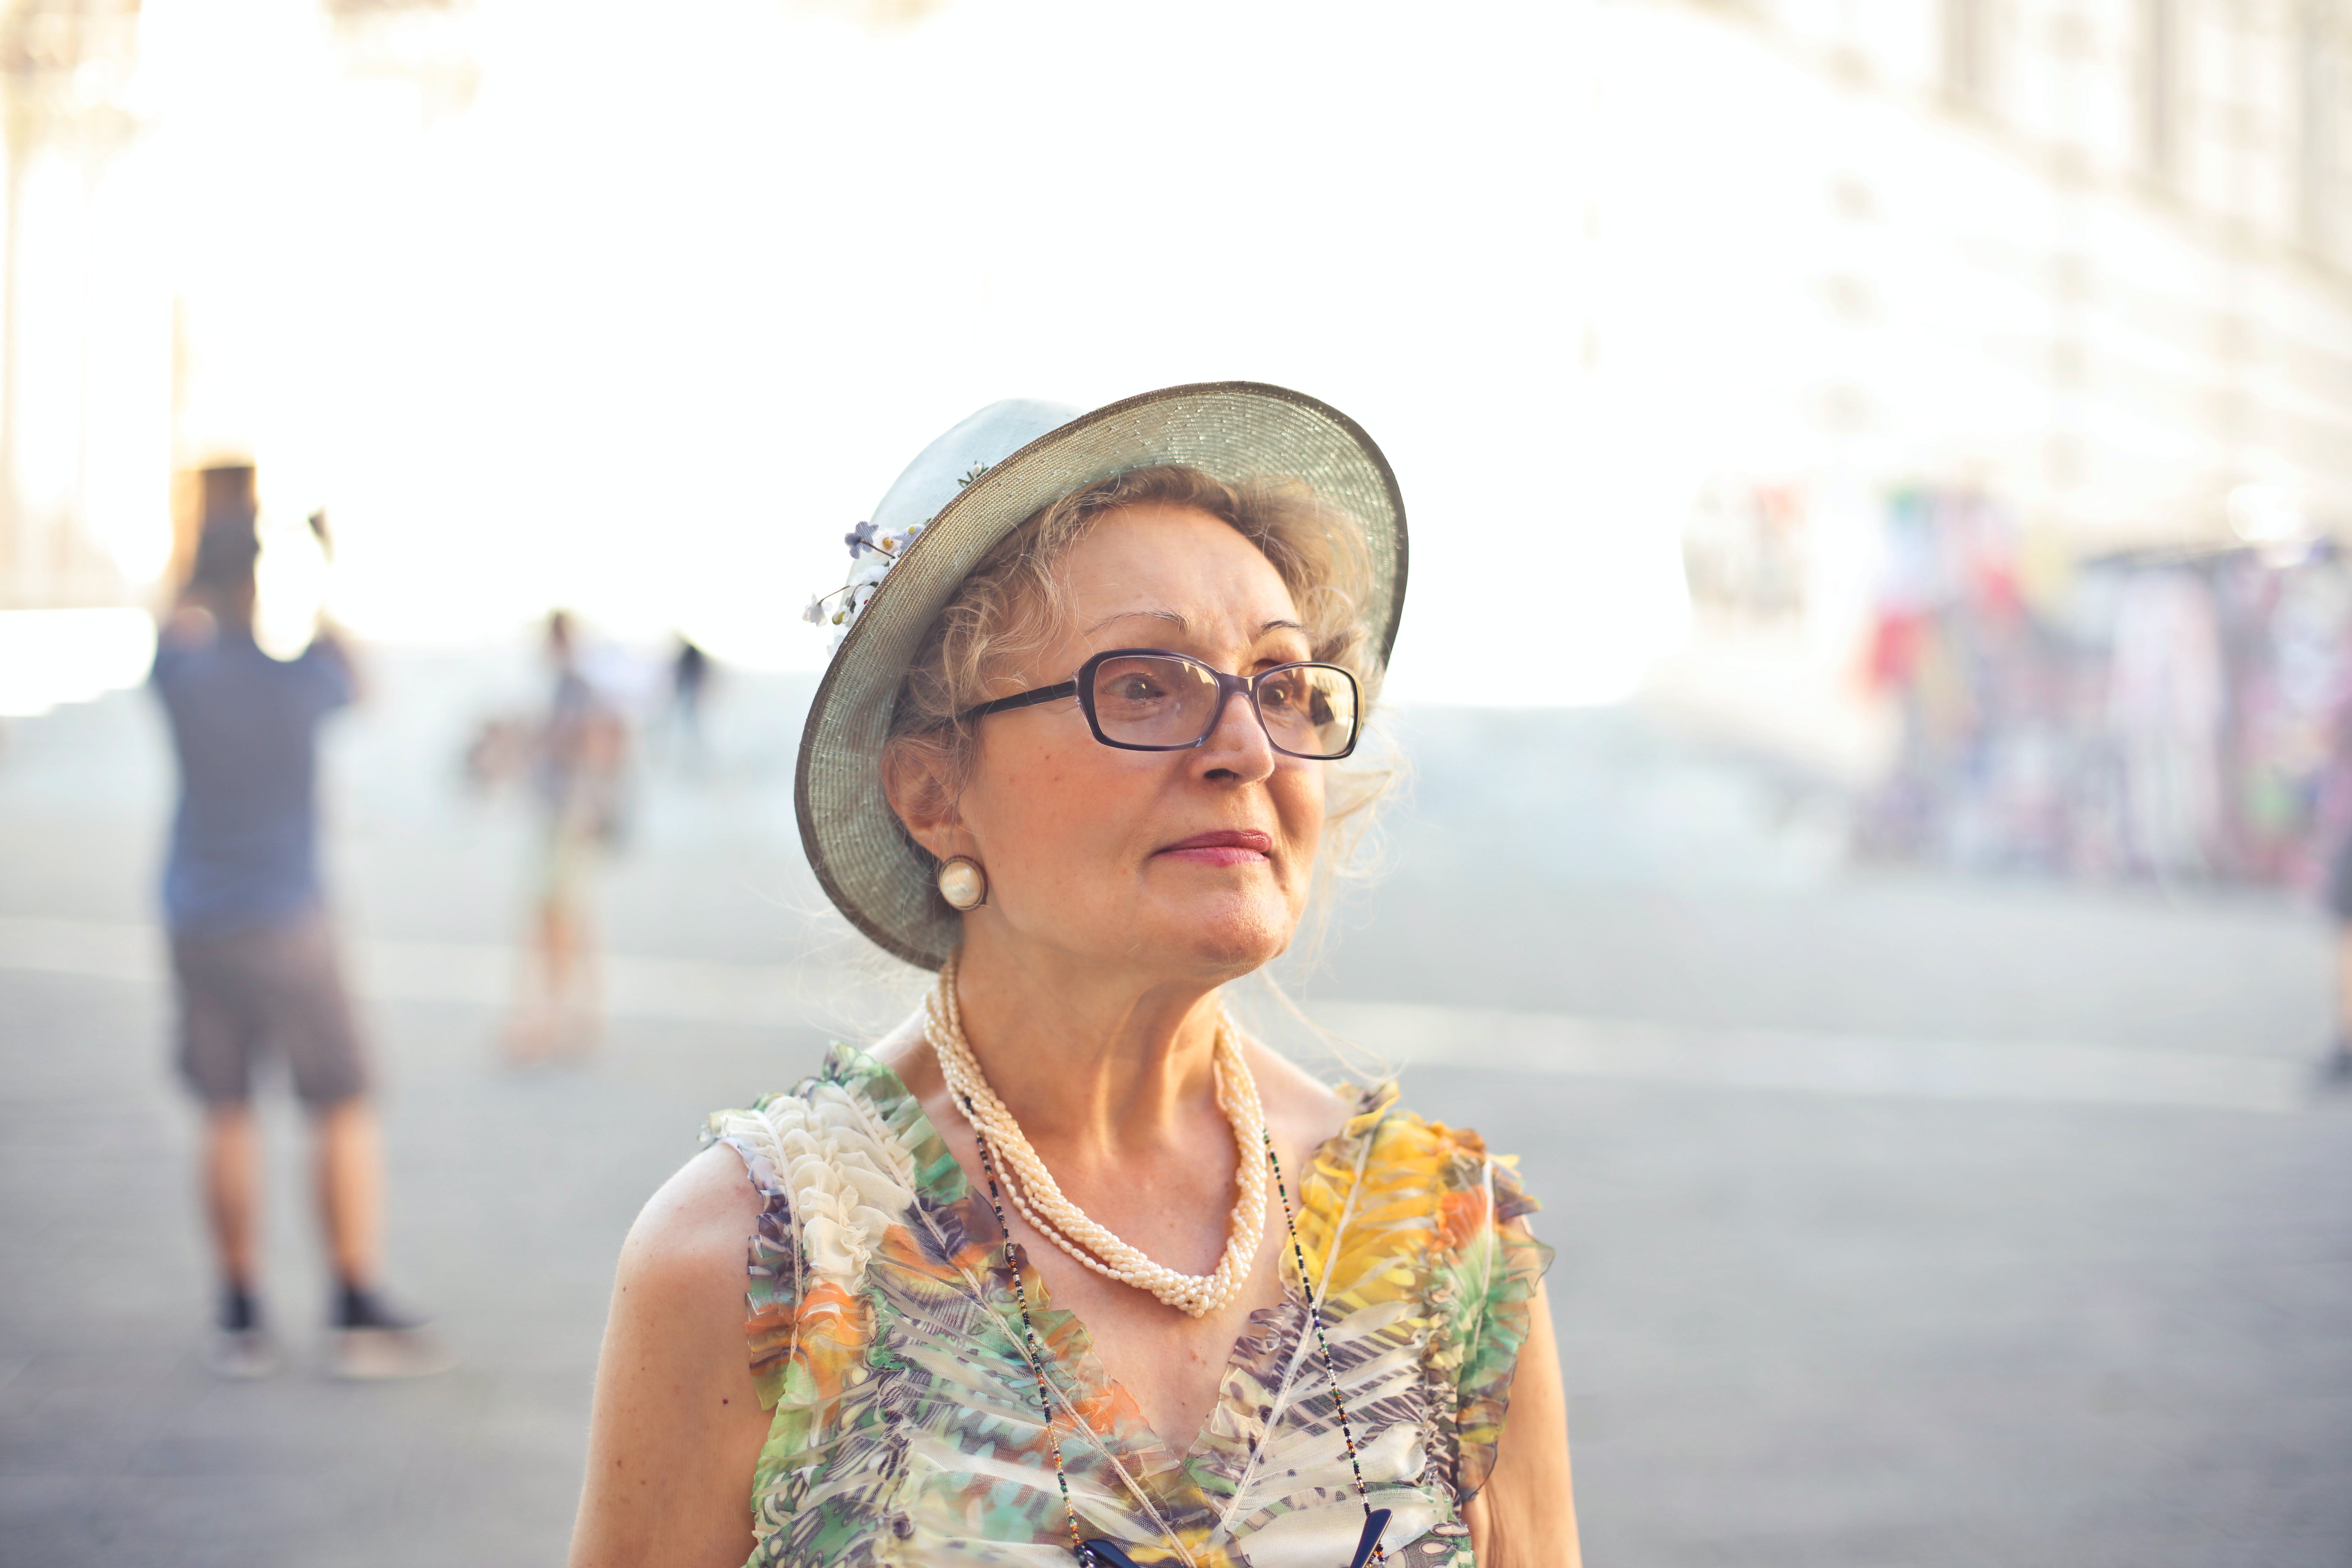 A serious-looking older woman | Source: Pexels